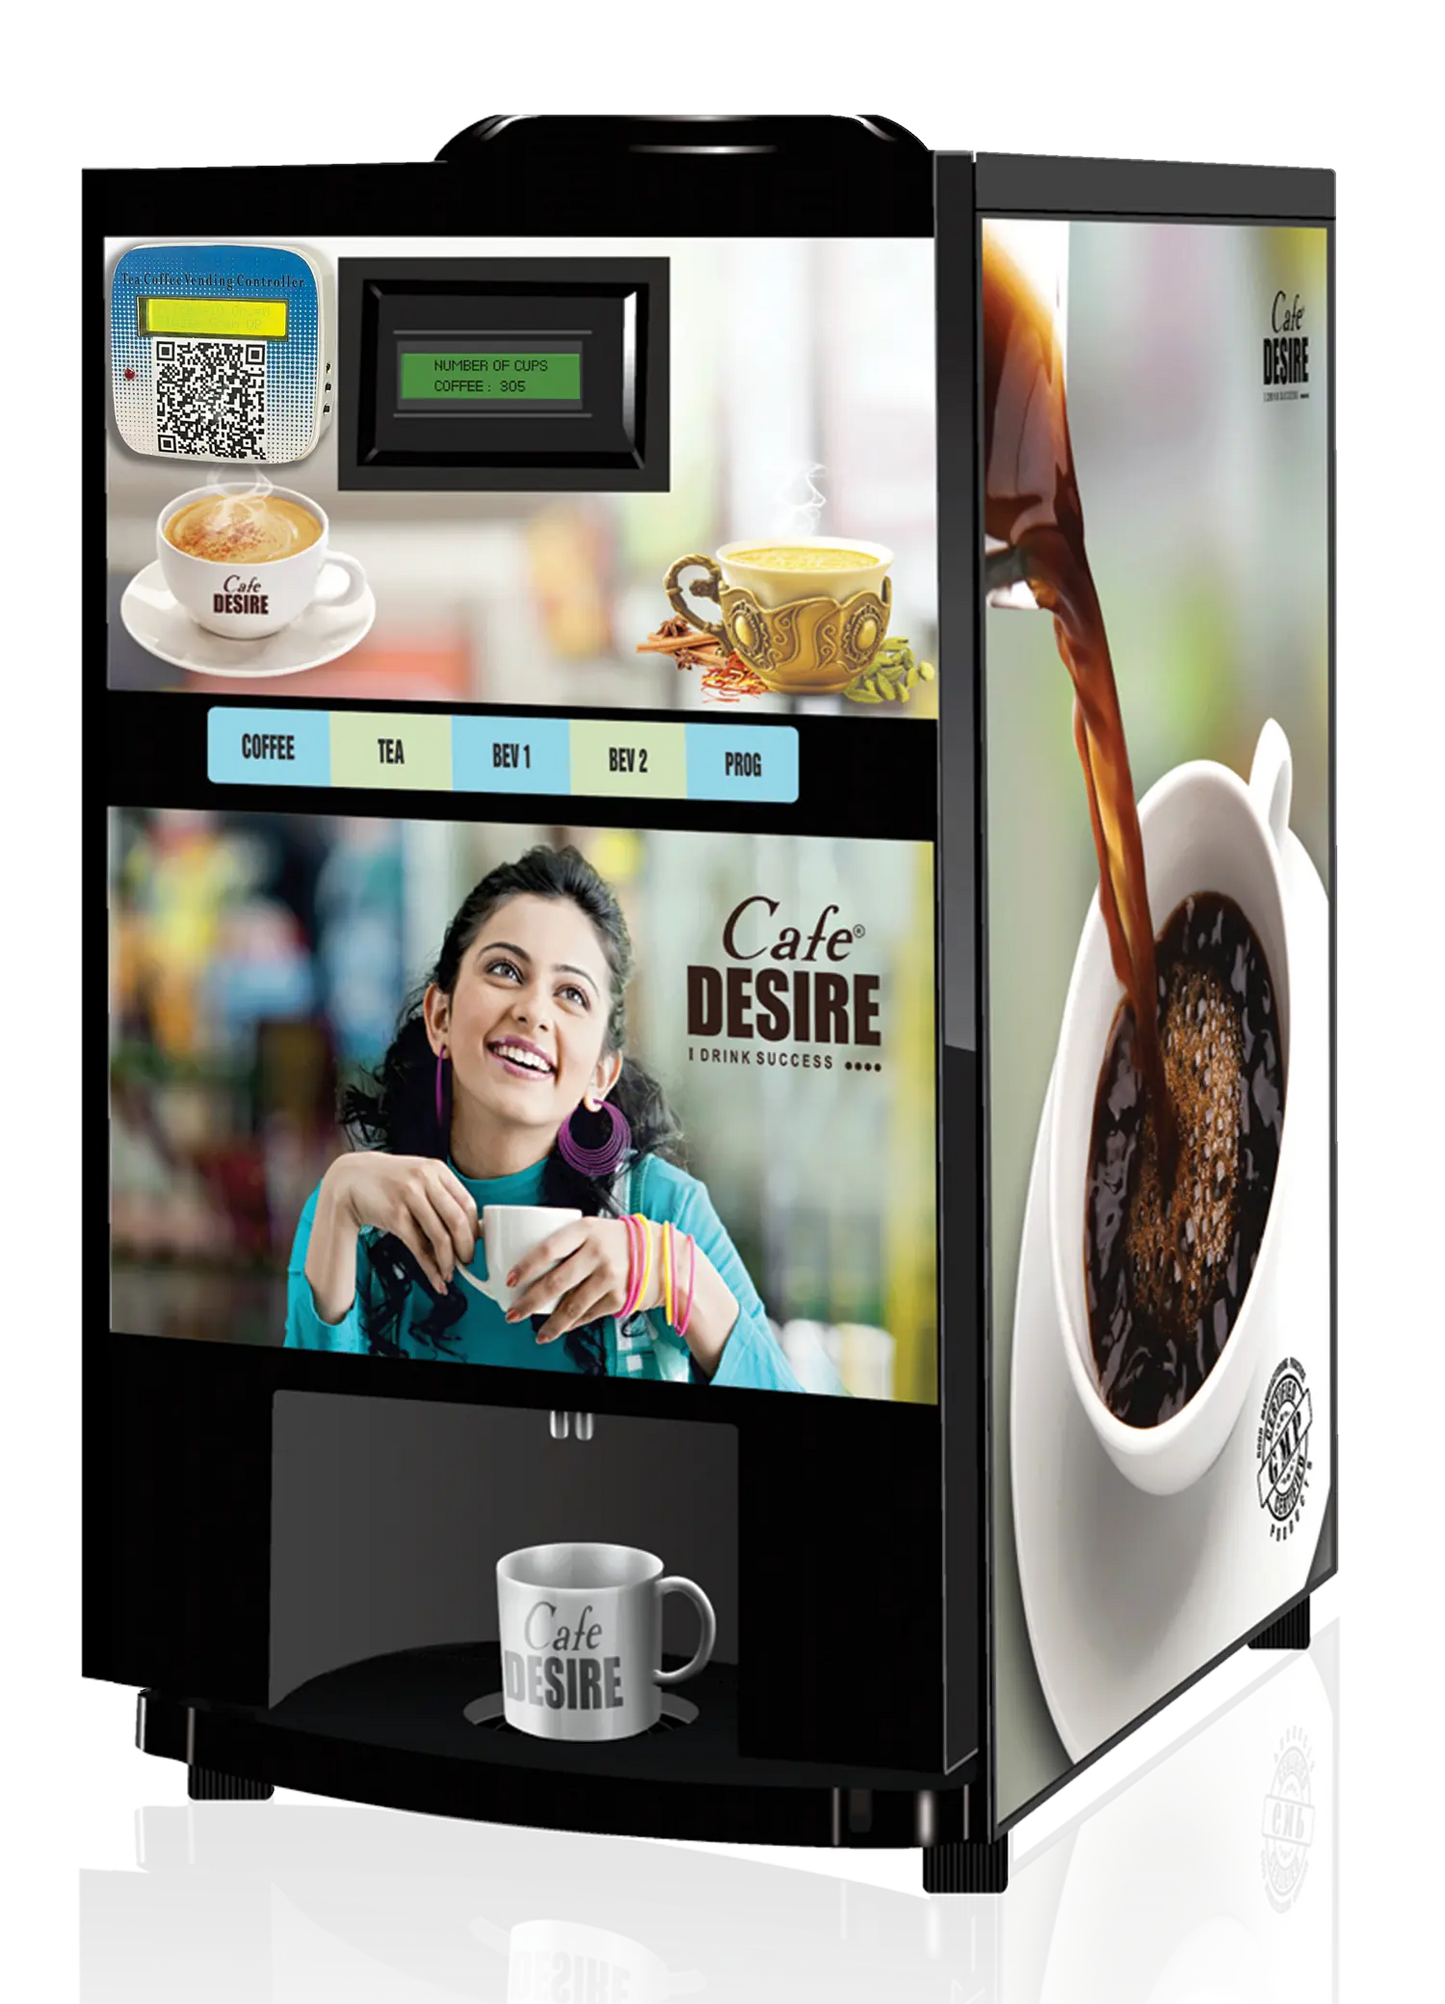 QR Code UPI Payment Enabled Coffee Machine 4 Lane | Four Beverage Options | Fully Automatic Tea & Coffee Vending Machine | For Offices, Shops and Smart Homes | Make 4 Varieties of Coffee Tea with Premix | No Milk, Tea, Coffee Powder Required - cafedesireonline.com